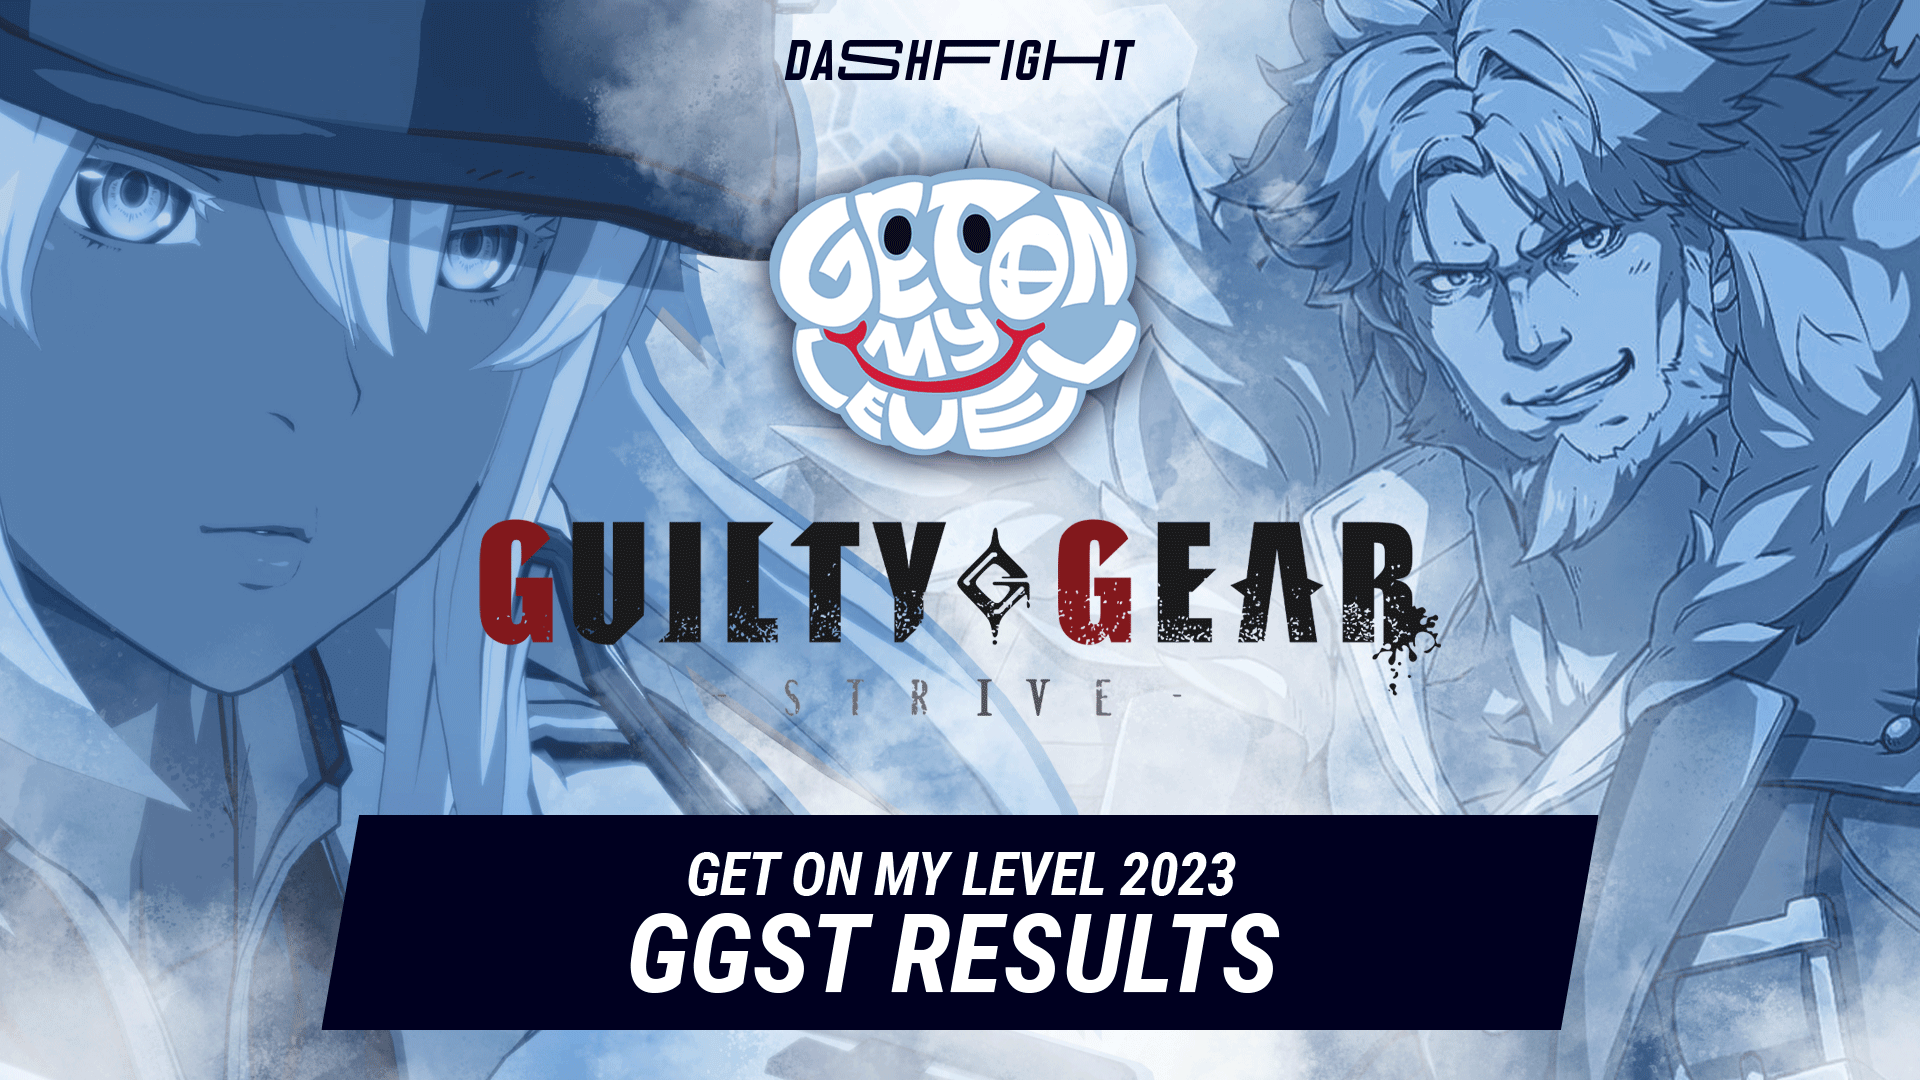 GG Strive at Get On My Level 2023: Shadow vs Bullets